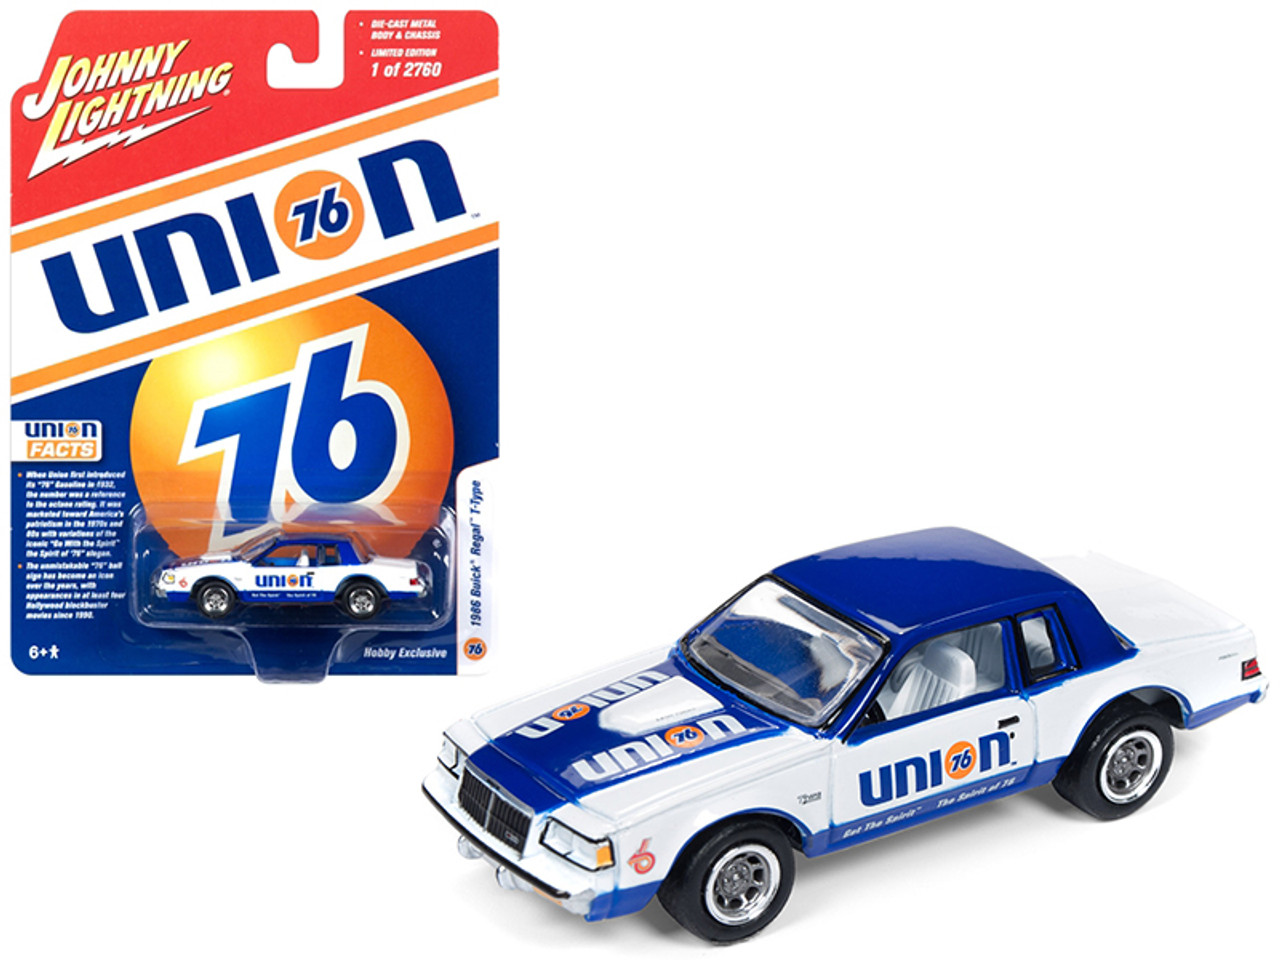 1986 Buick Regal T-Type "Union 76" White and Blue Limited Edition to 2760 pieces Worldwide 1/64 Diecast Model Car by Johnny Lightning